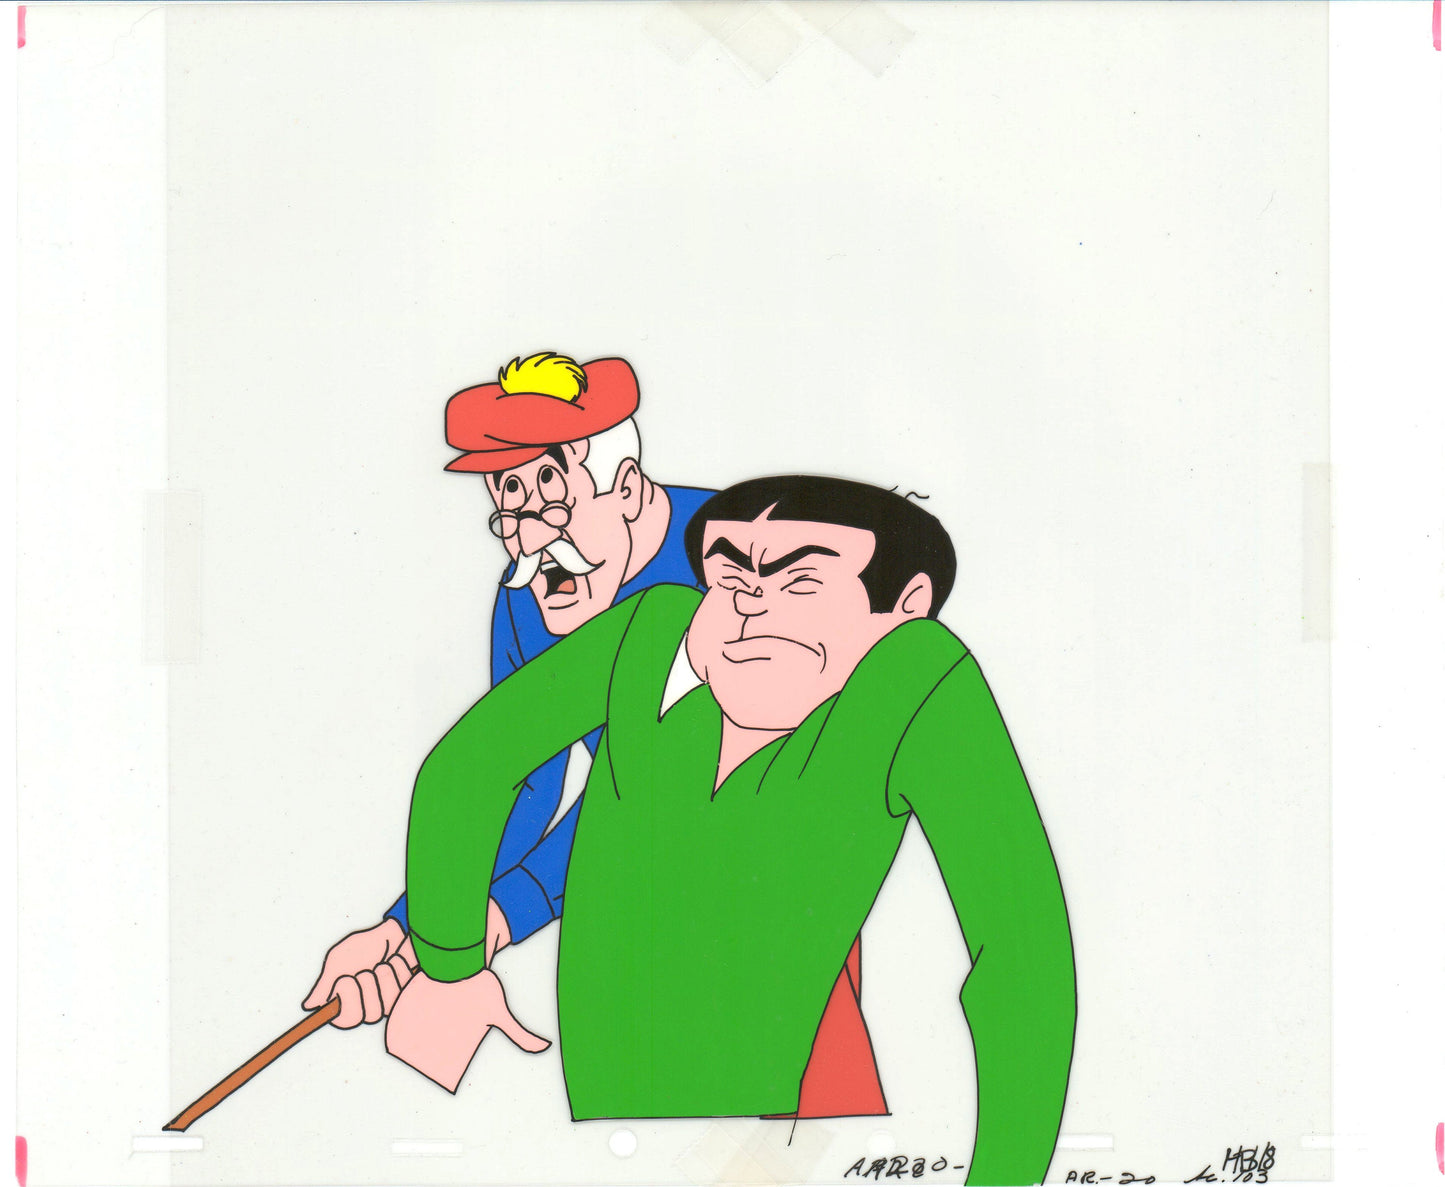 Archie Production Animation Art Cel Setup from Filmation 1968-1969 b2030